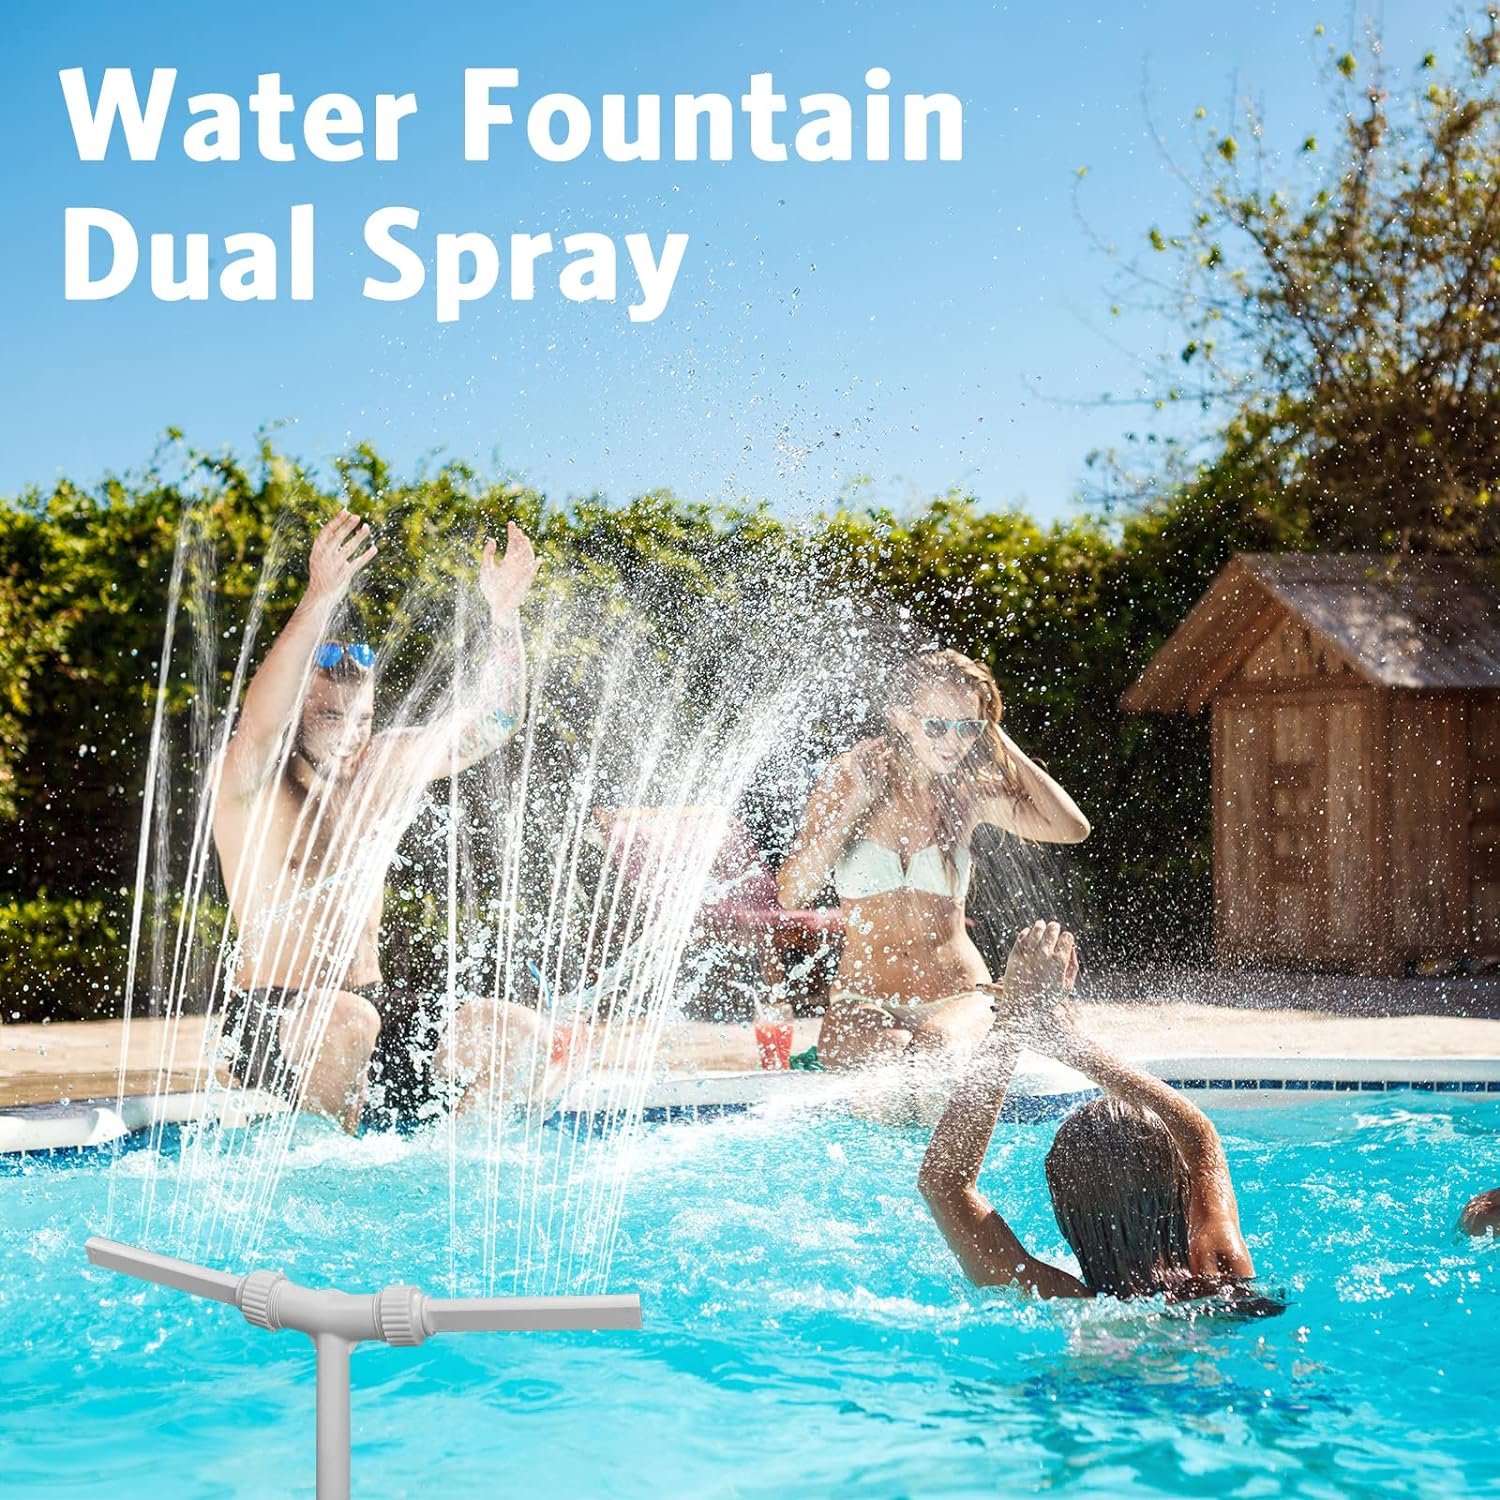 Swimming Pool Waterfall Fountain Spray, Water Fountain Dual Spray, Water Spray Spa Fun Sprinkler, Garden Sprinkle Outdoor Decor for for Yard Garden Indoor Outdoor Pools